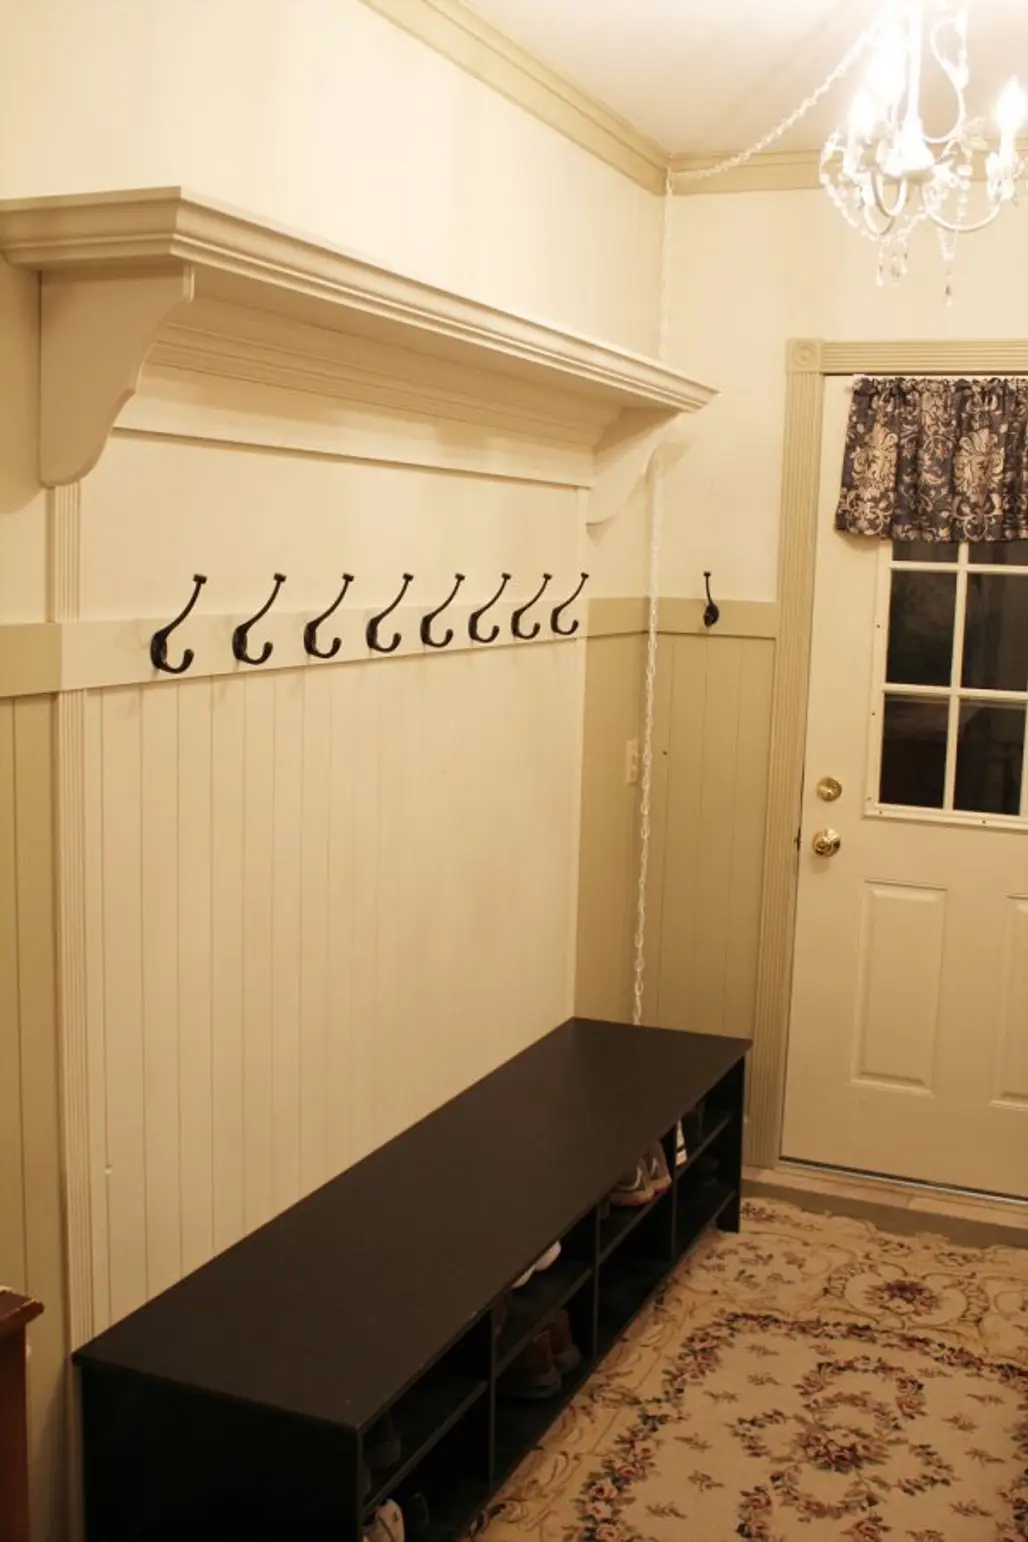 Adding a Coat Rack to Your Wainscoating